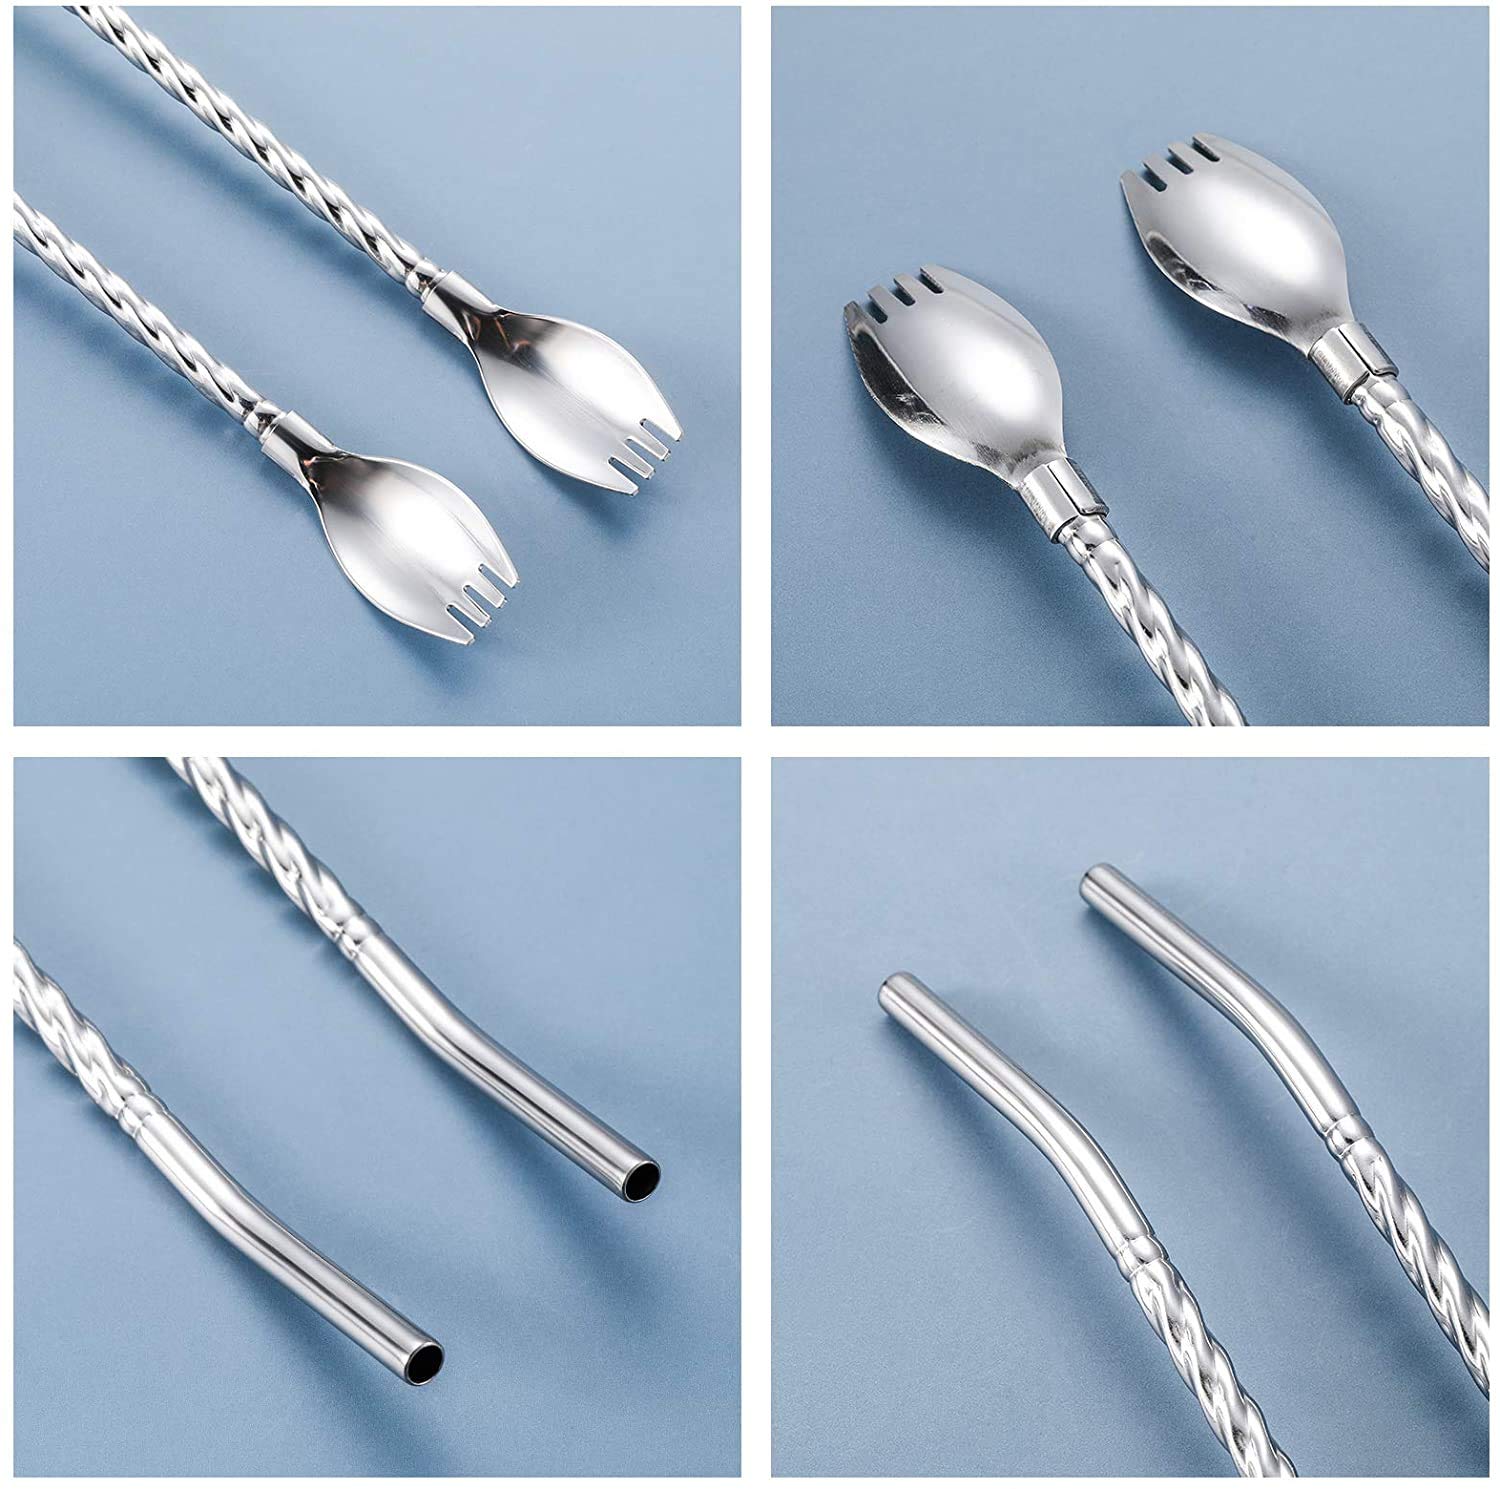 NJ Stainless Steel Sporks Straws with Spoons on The End for Drinking, Long Handle Bar Spork Spoon Silverware for Coffee, Bar Spoon, Bar Stirrer, Cocktail, Ice Cream Mixing and Stirring: 06 Pcs